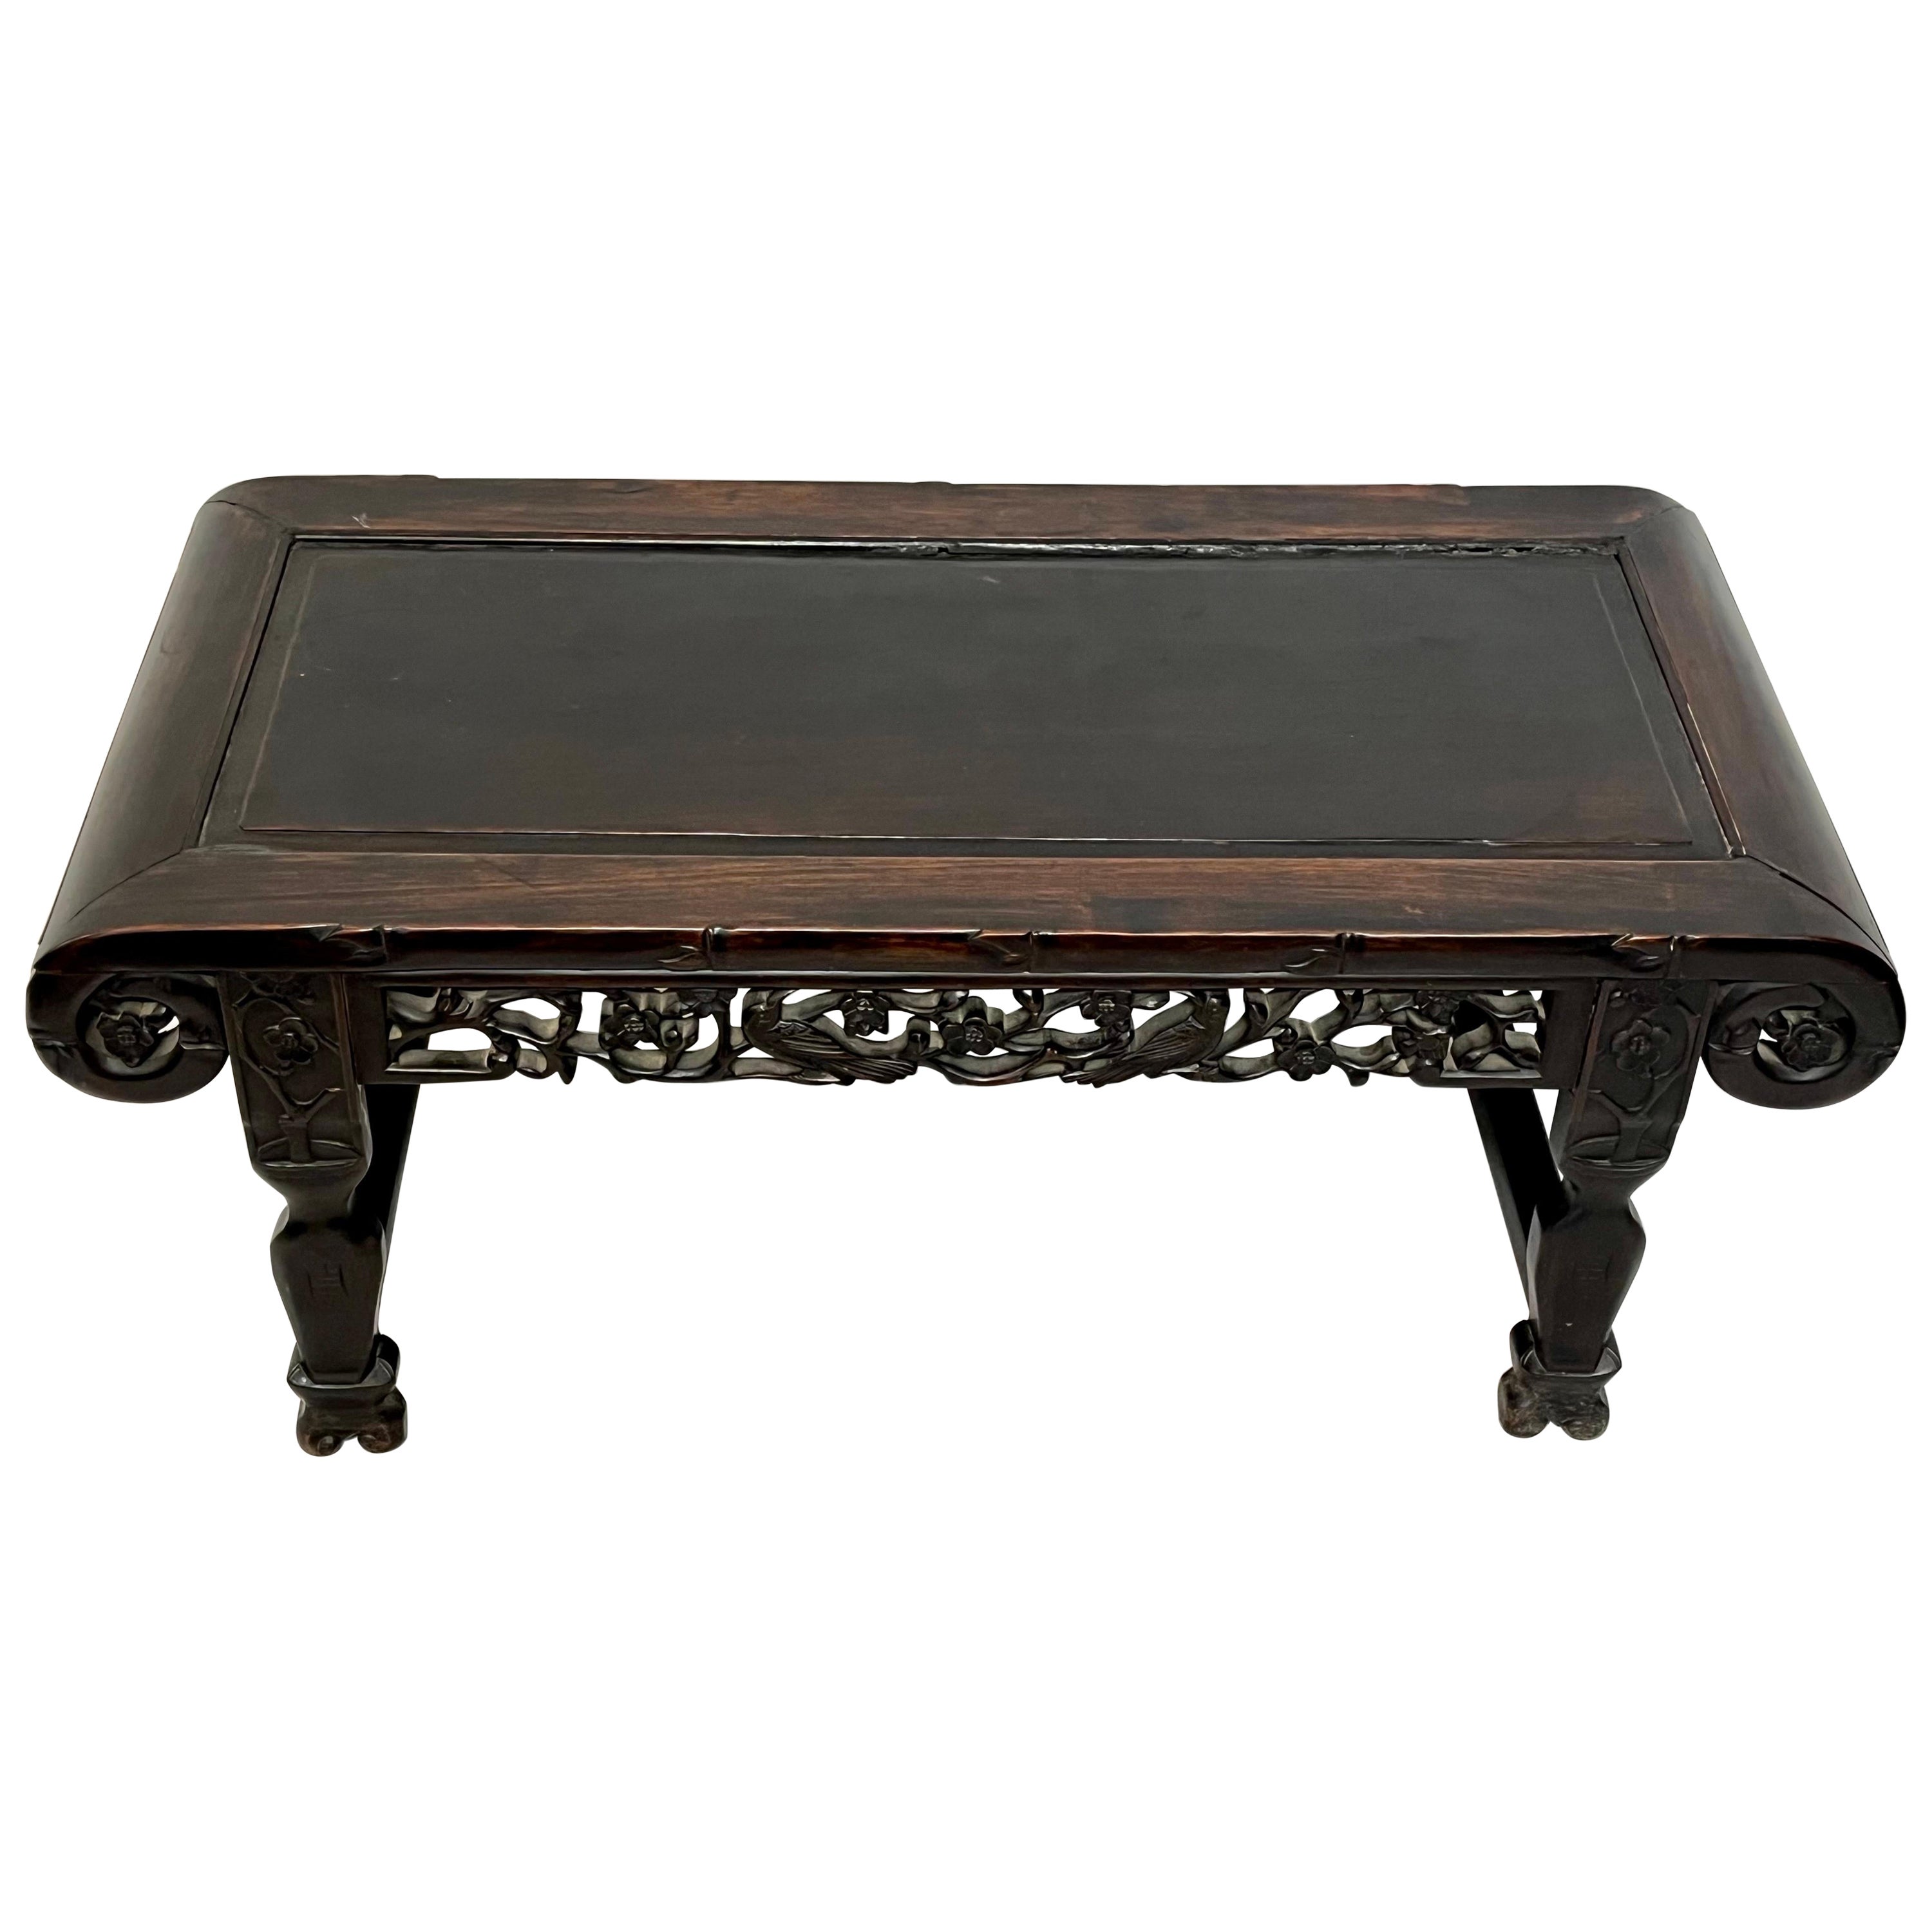 Asian Antique Carved and Pierced Fretwork Rounded Corners Low or Coffee Table